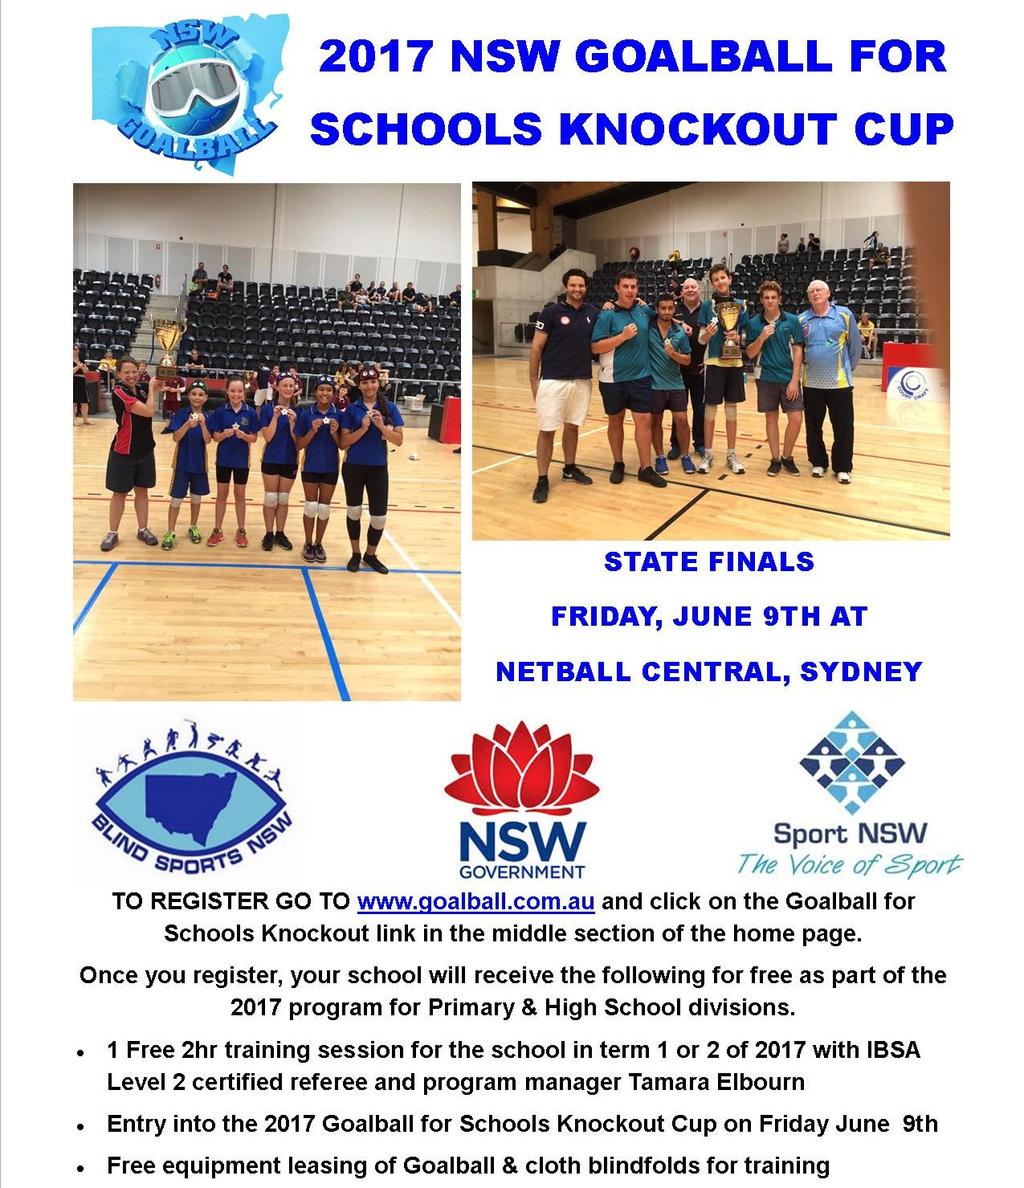 2017 NSW Goalball for Schools Knockout Cup Following the amazing success of the 2016 NSW Goalball for Schools Knockout Cup, we are back bigger and better in 2017.